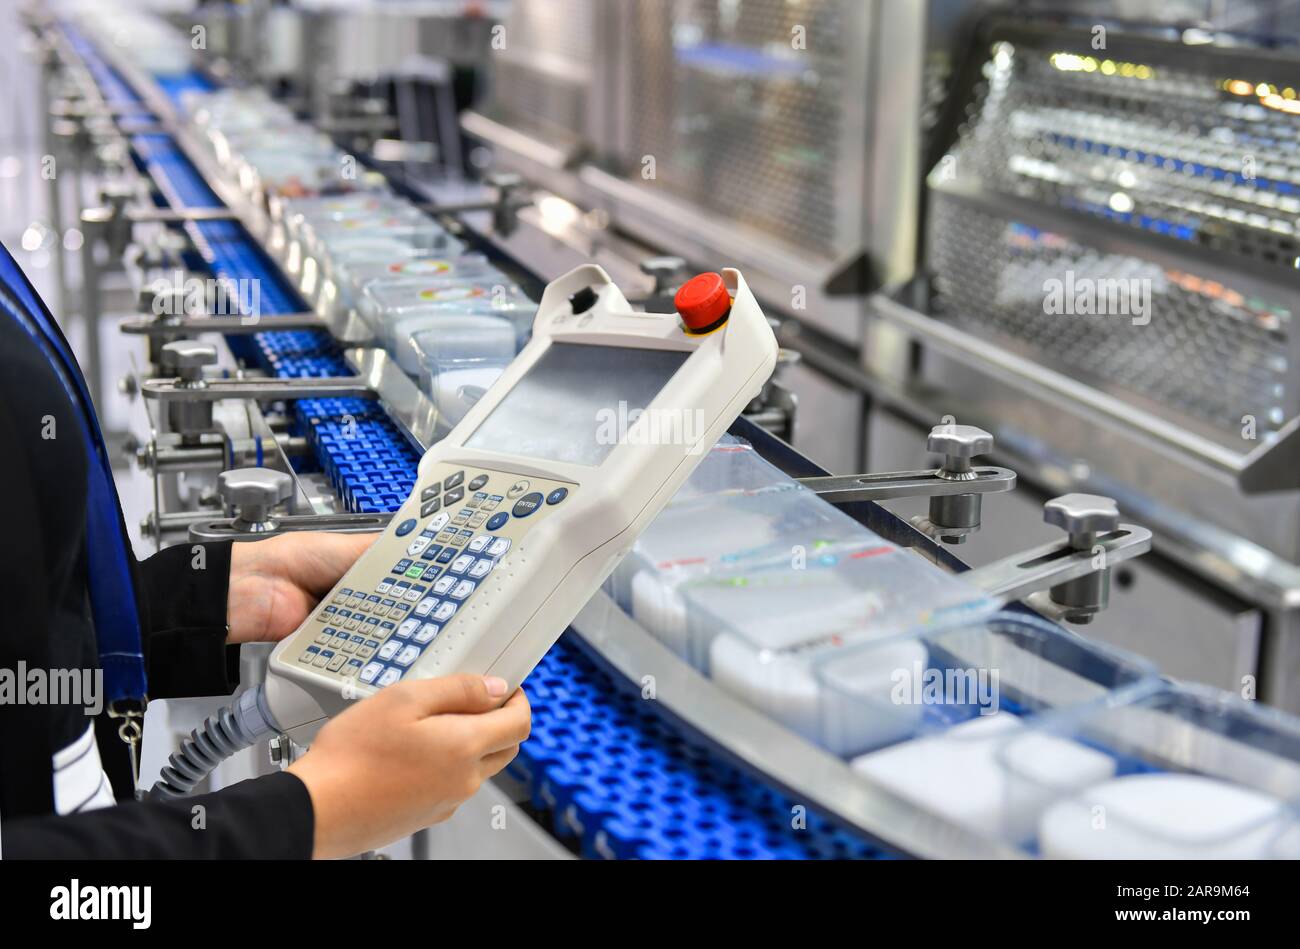 Manager check and control automation Food products boxs transfer on Automated conveyor systems in factory Stock Photo